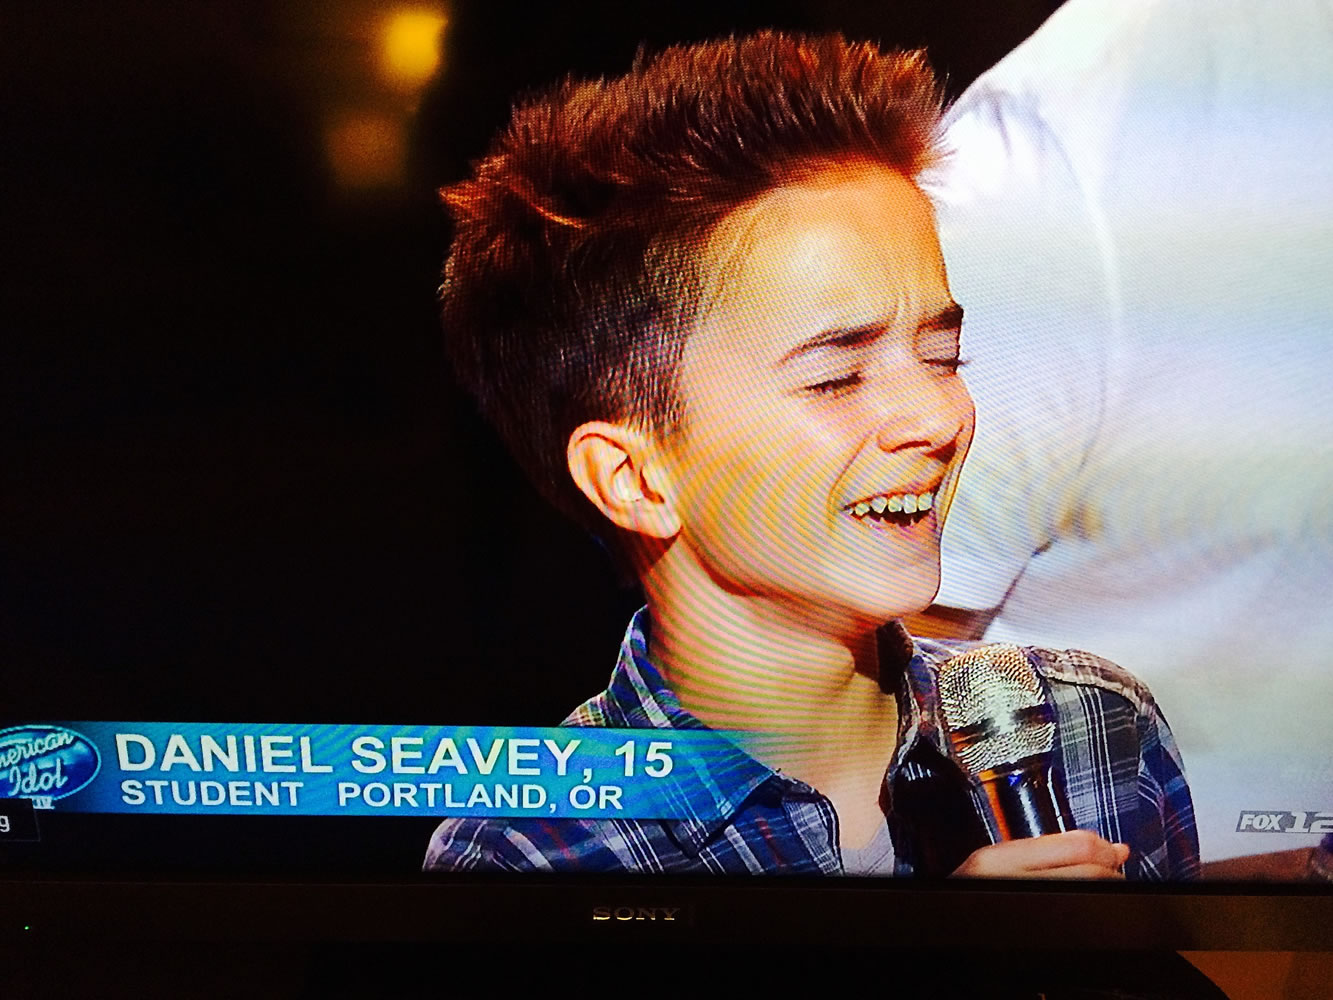 Daniel Seavey of Vancouver performs in an episode of American Idol that aired Wednesday night.